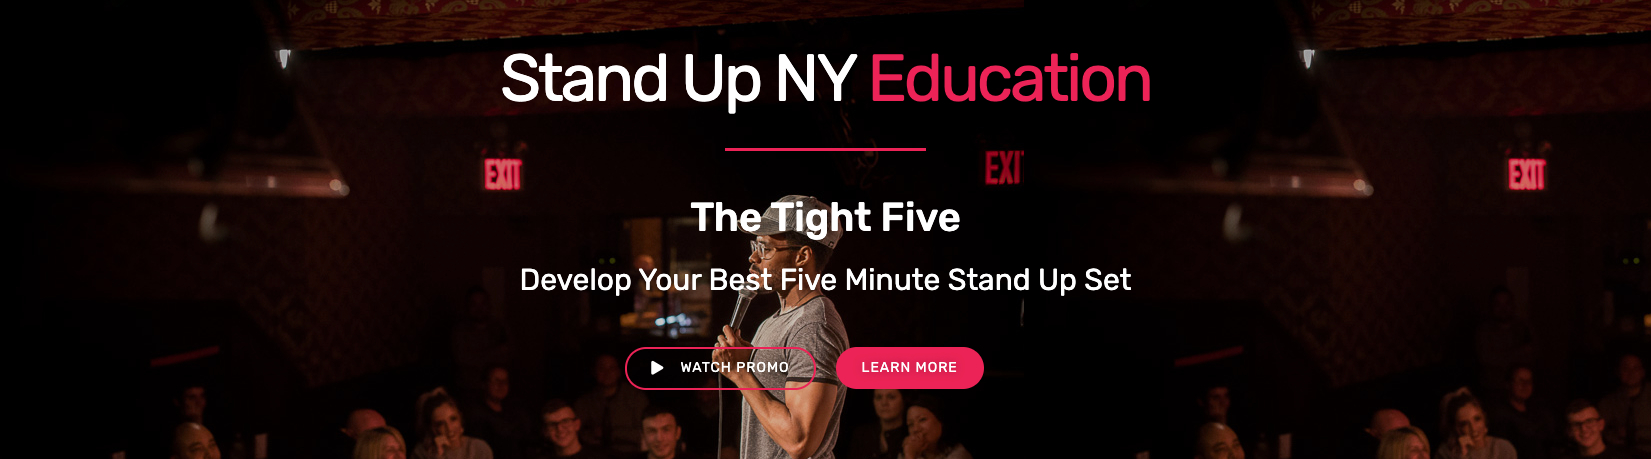 Stand up ny-image 3